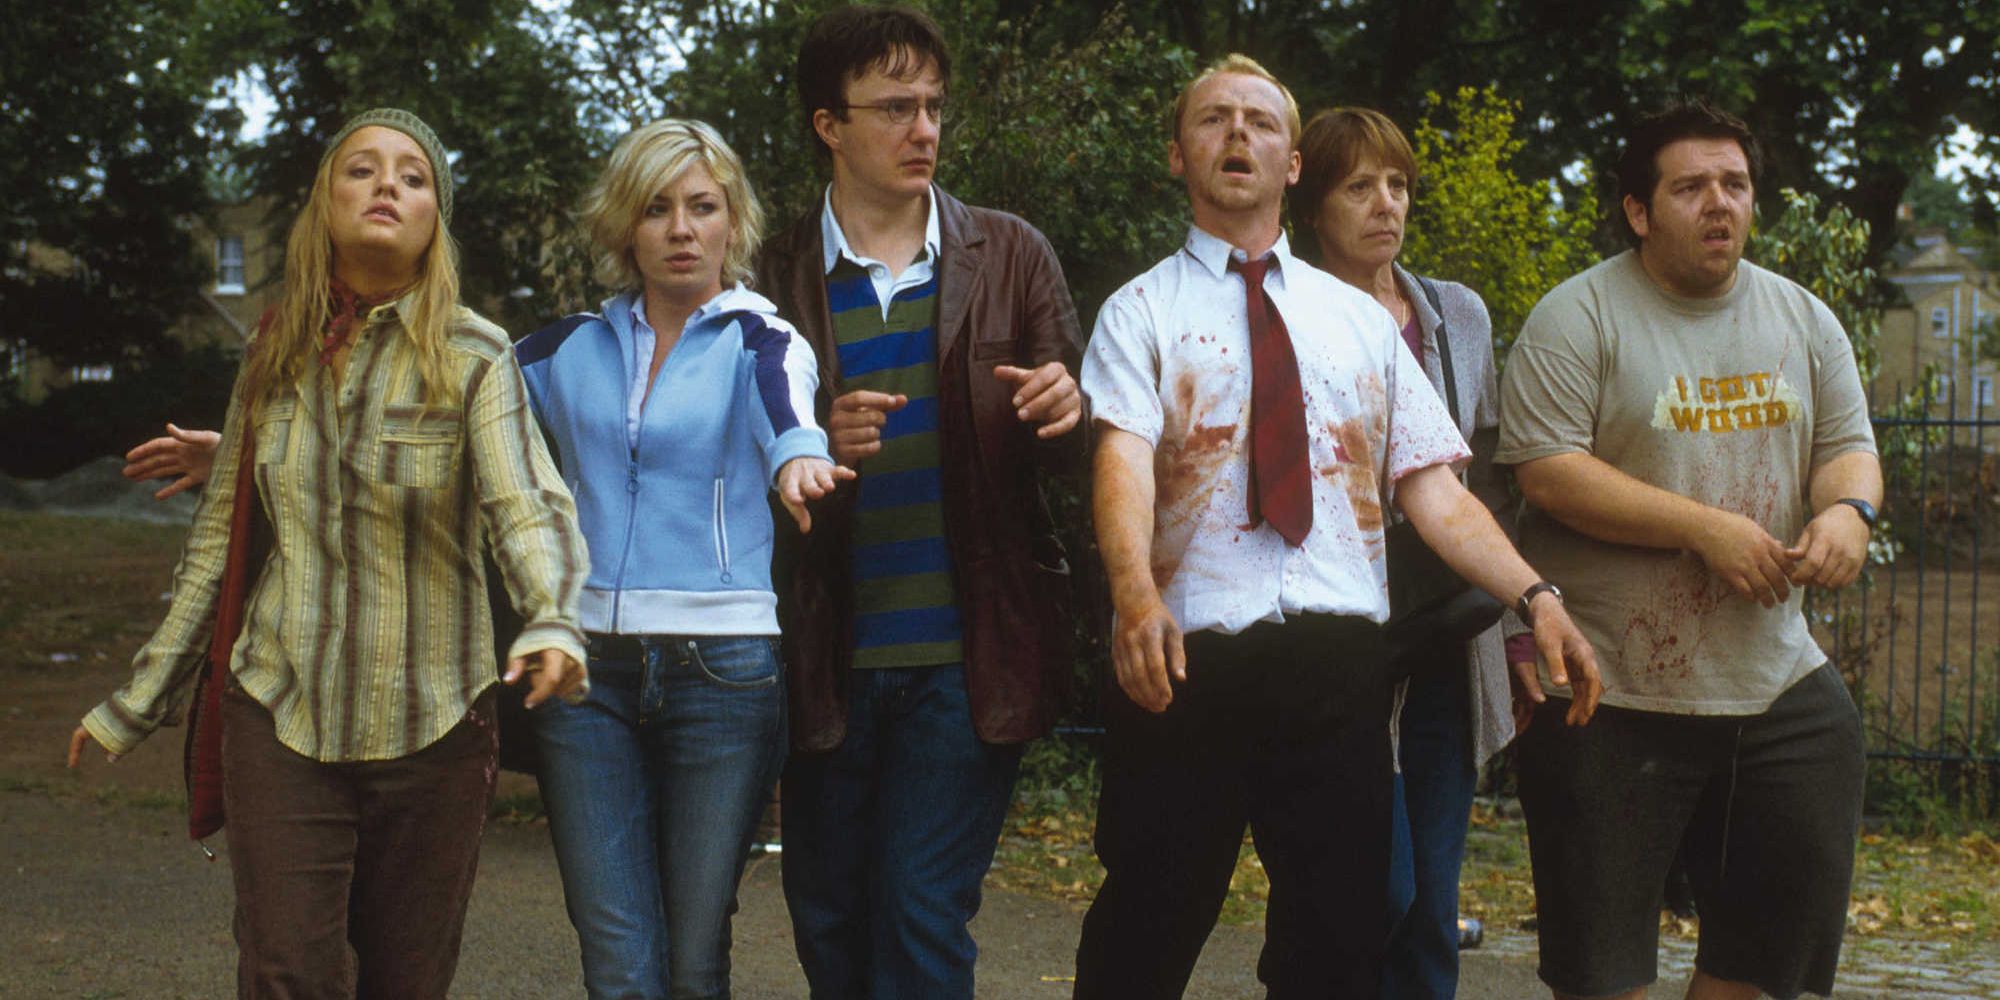 Shaun and his friends pretend to be zombies in Shaun of the Dead